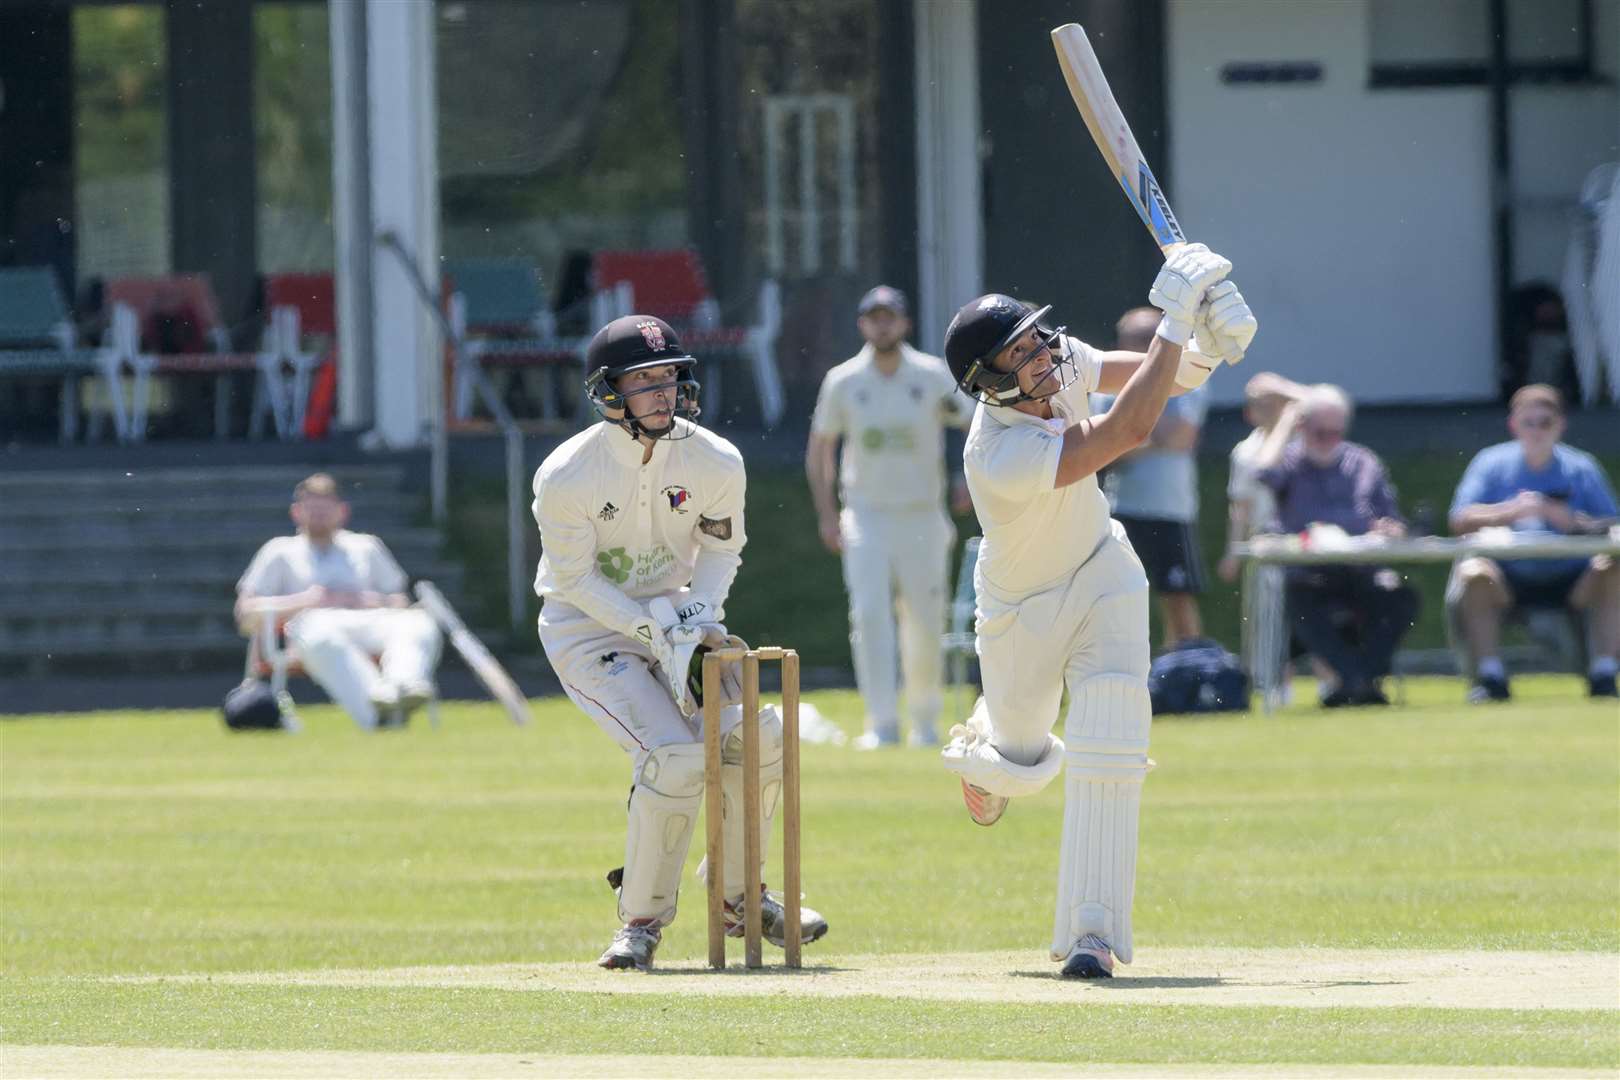 Callum Jackson batting for Dartford against The Mote at Hesketh Park Picture: Andy Payton